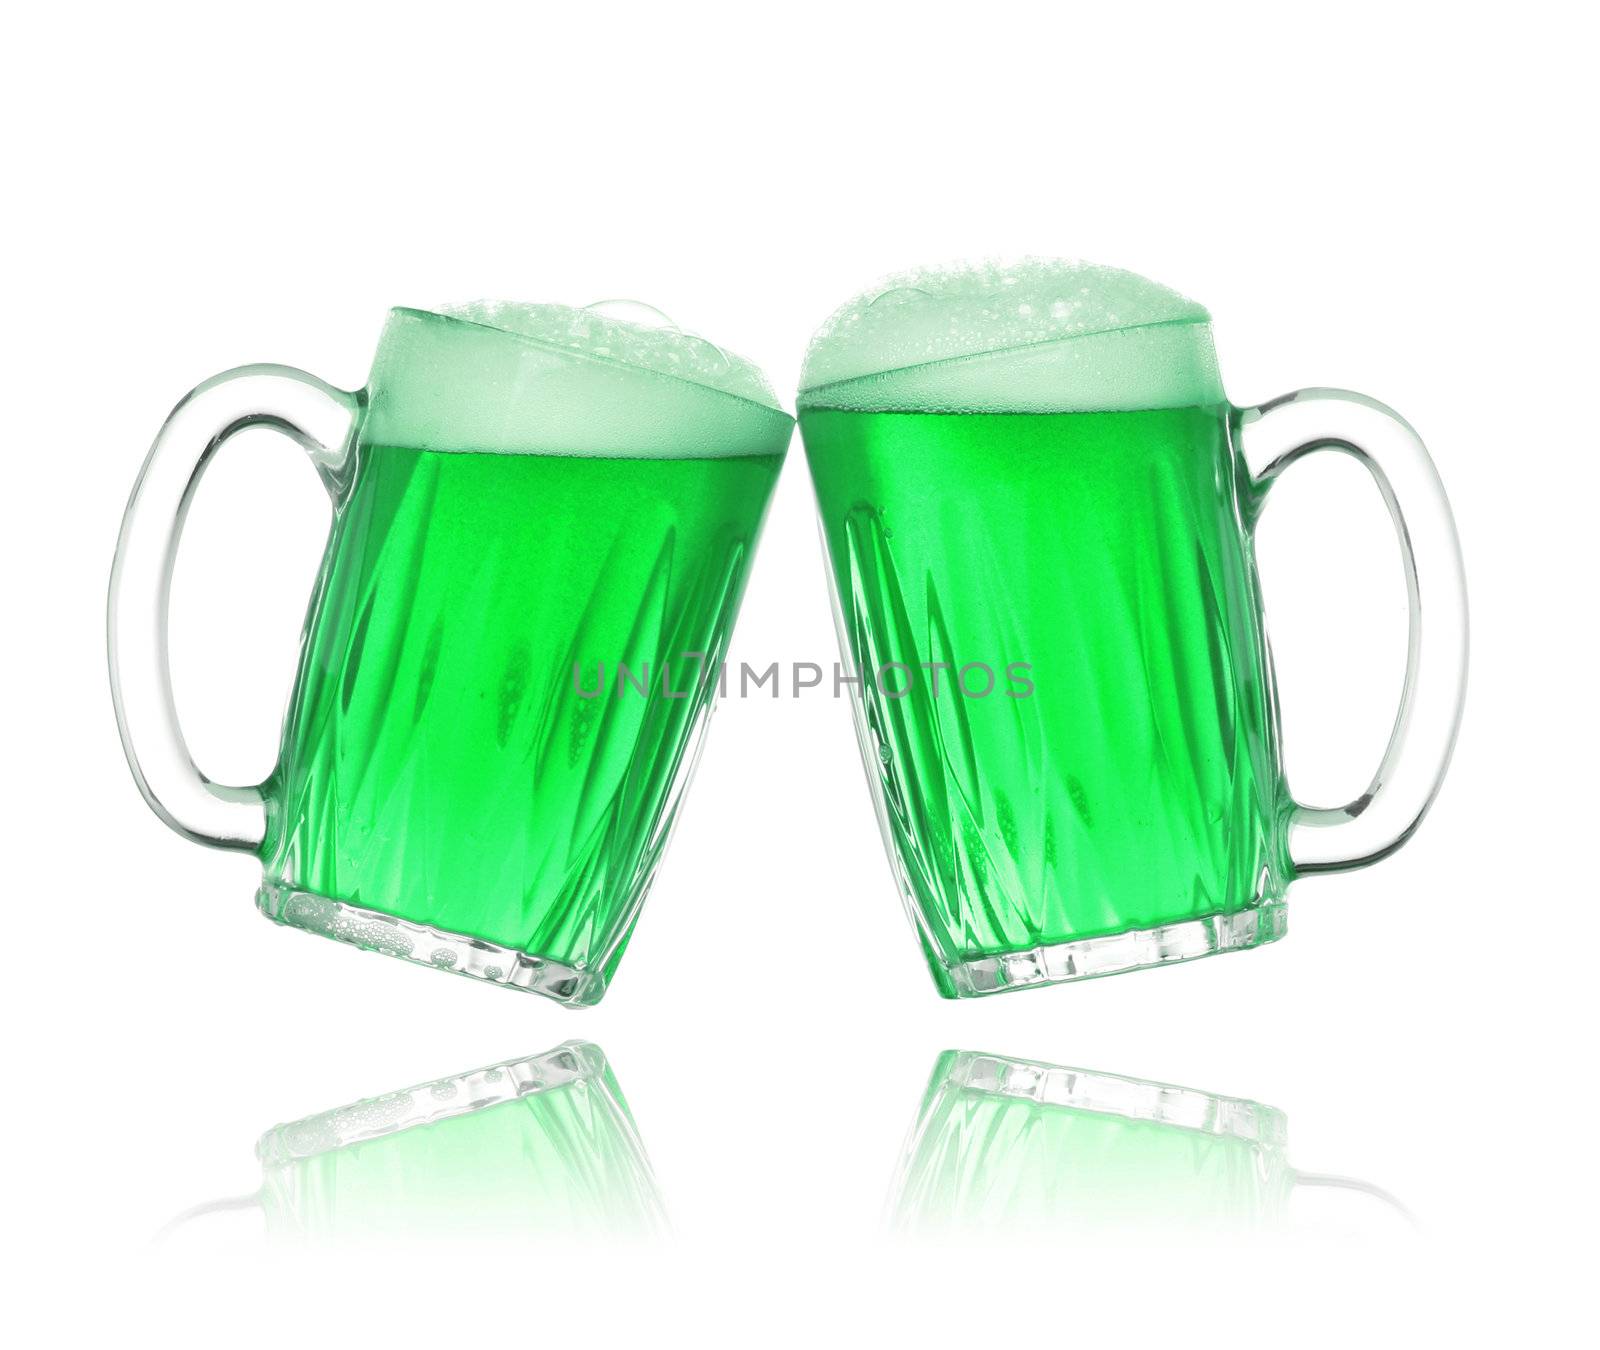 Celebration toast with St. Patrick's Day beer by Erdosain